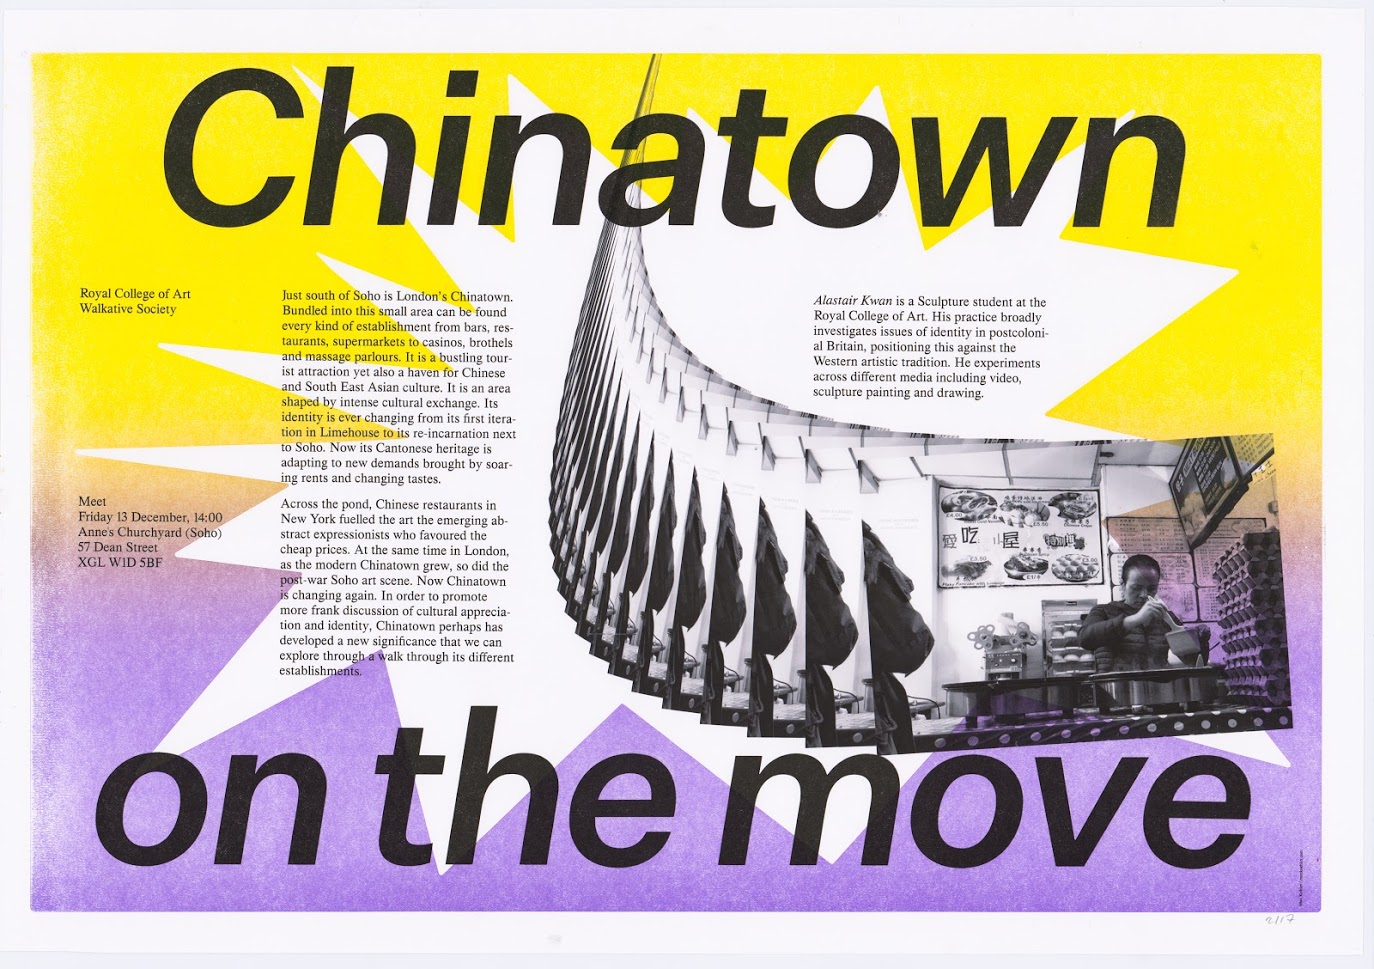 Scan of the chinatown poster